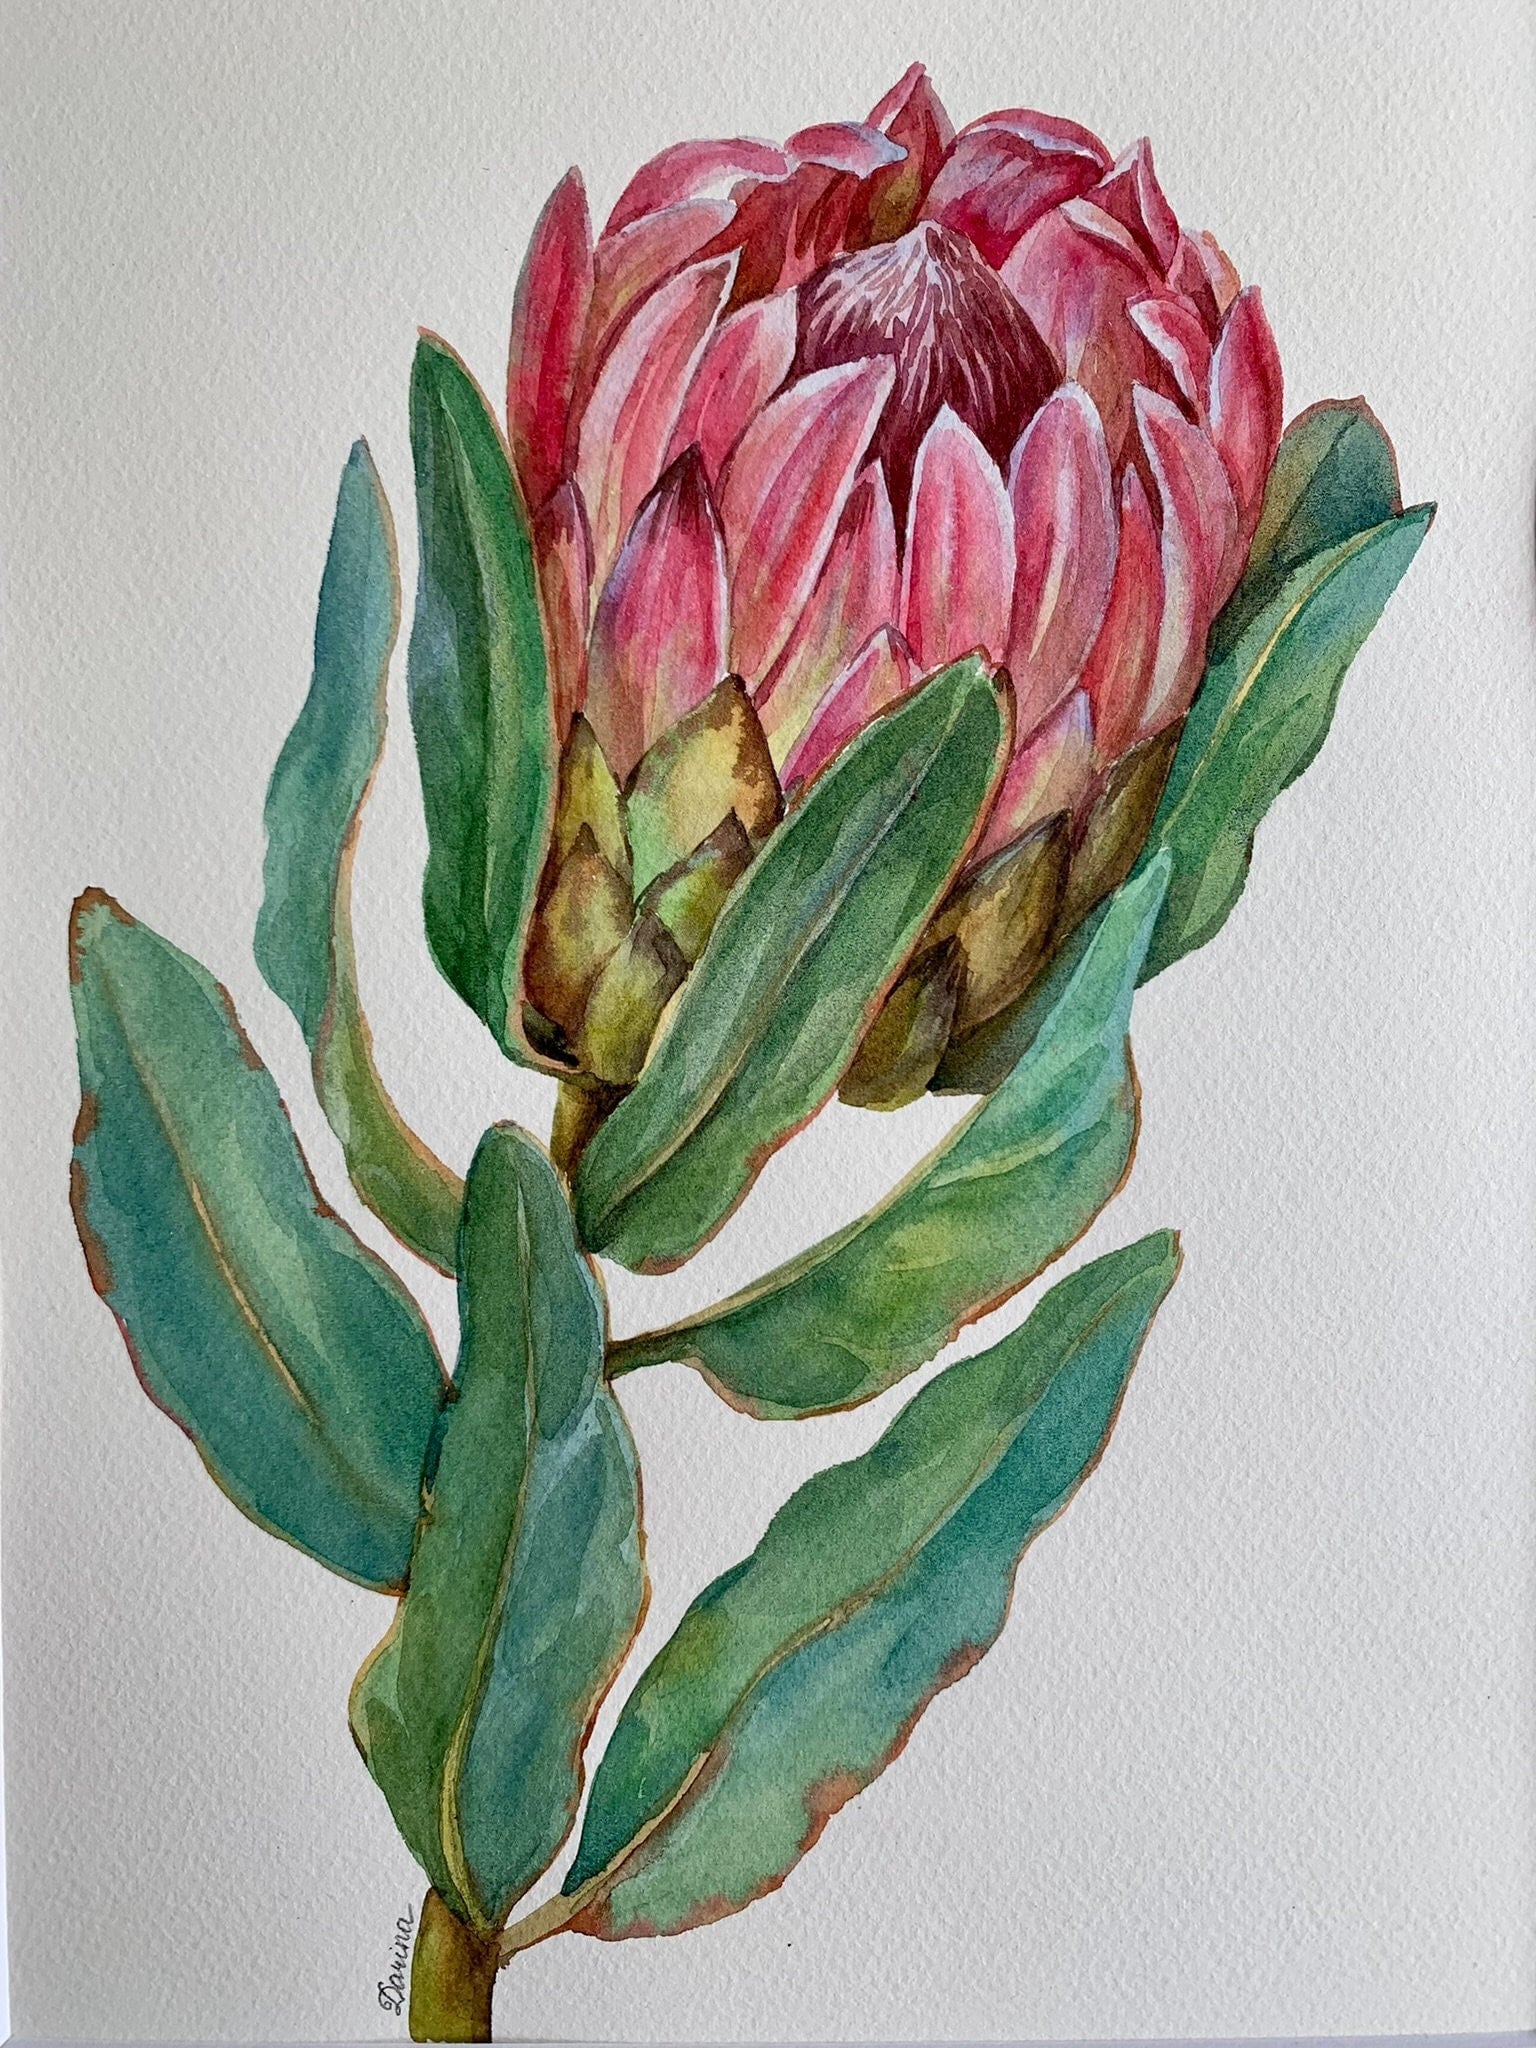 protea watercolour painting - OFF-65% > Shipping free